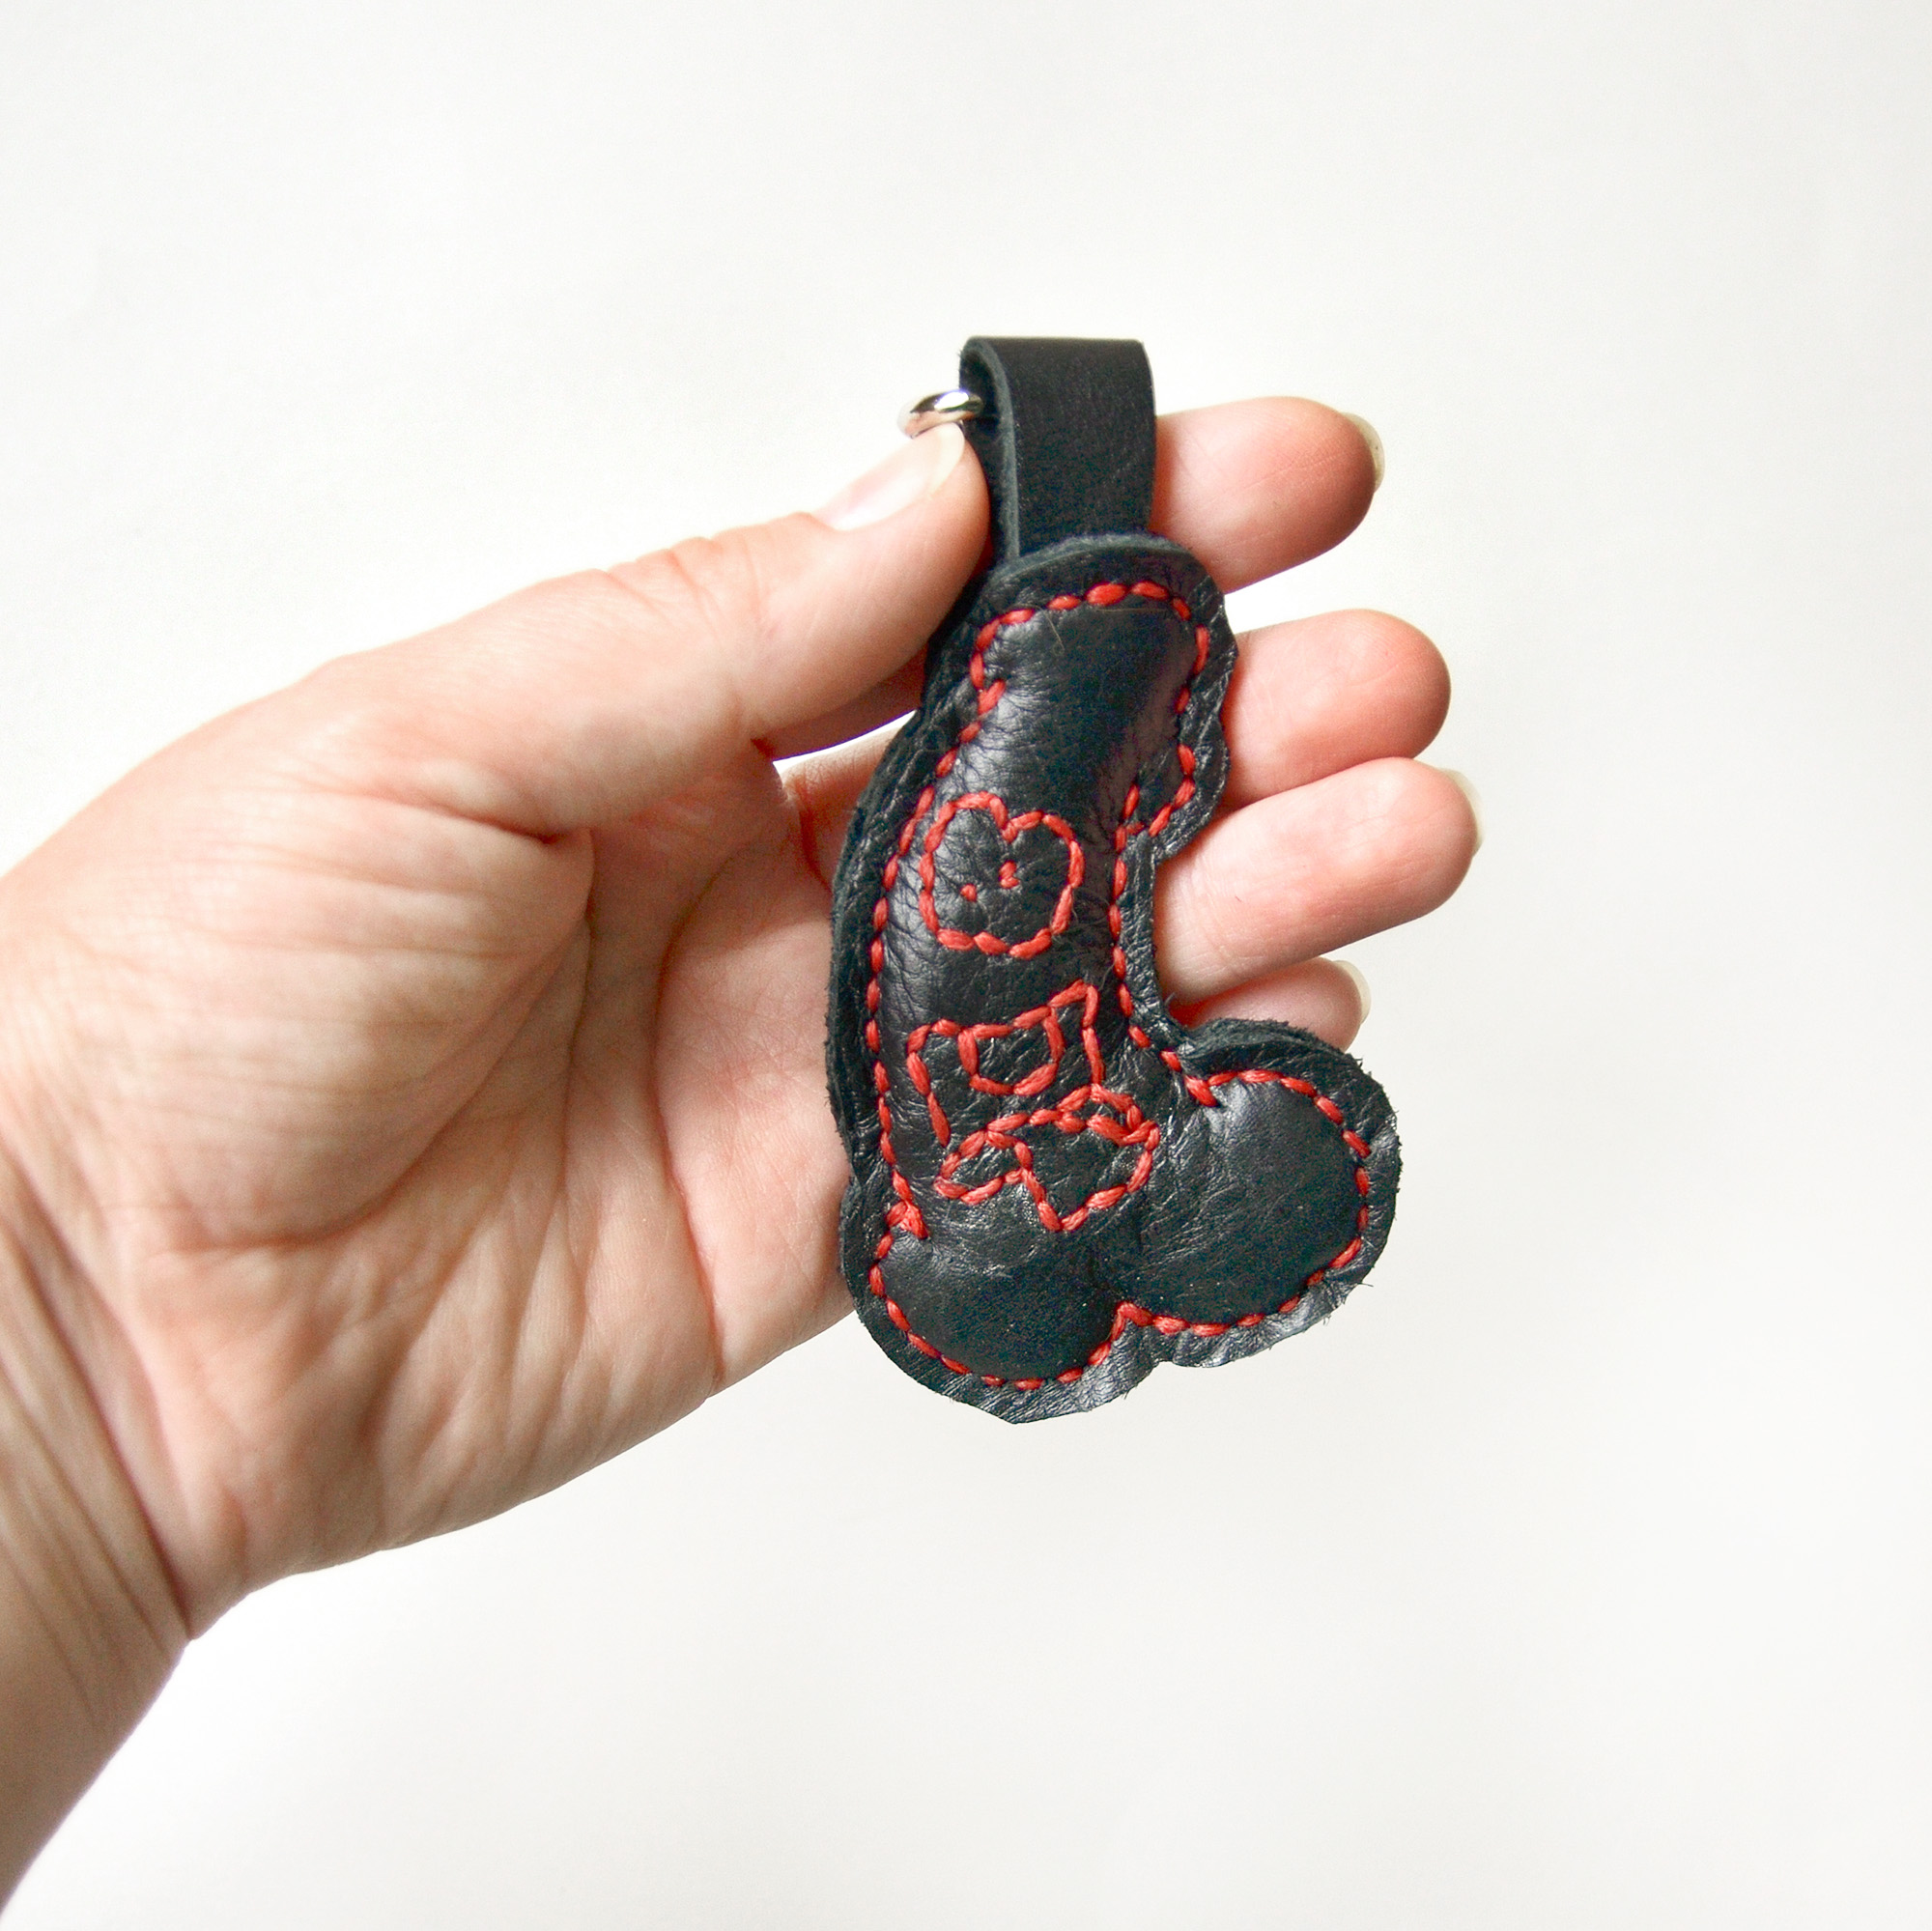 Penis keychain face Leather black dick keyholder, gift picture